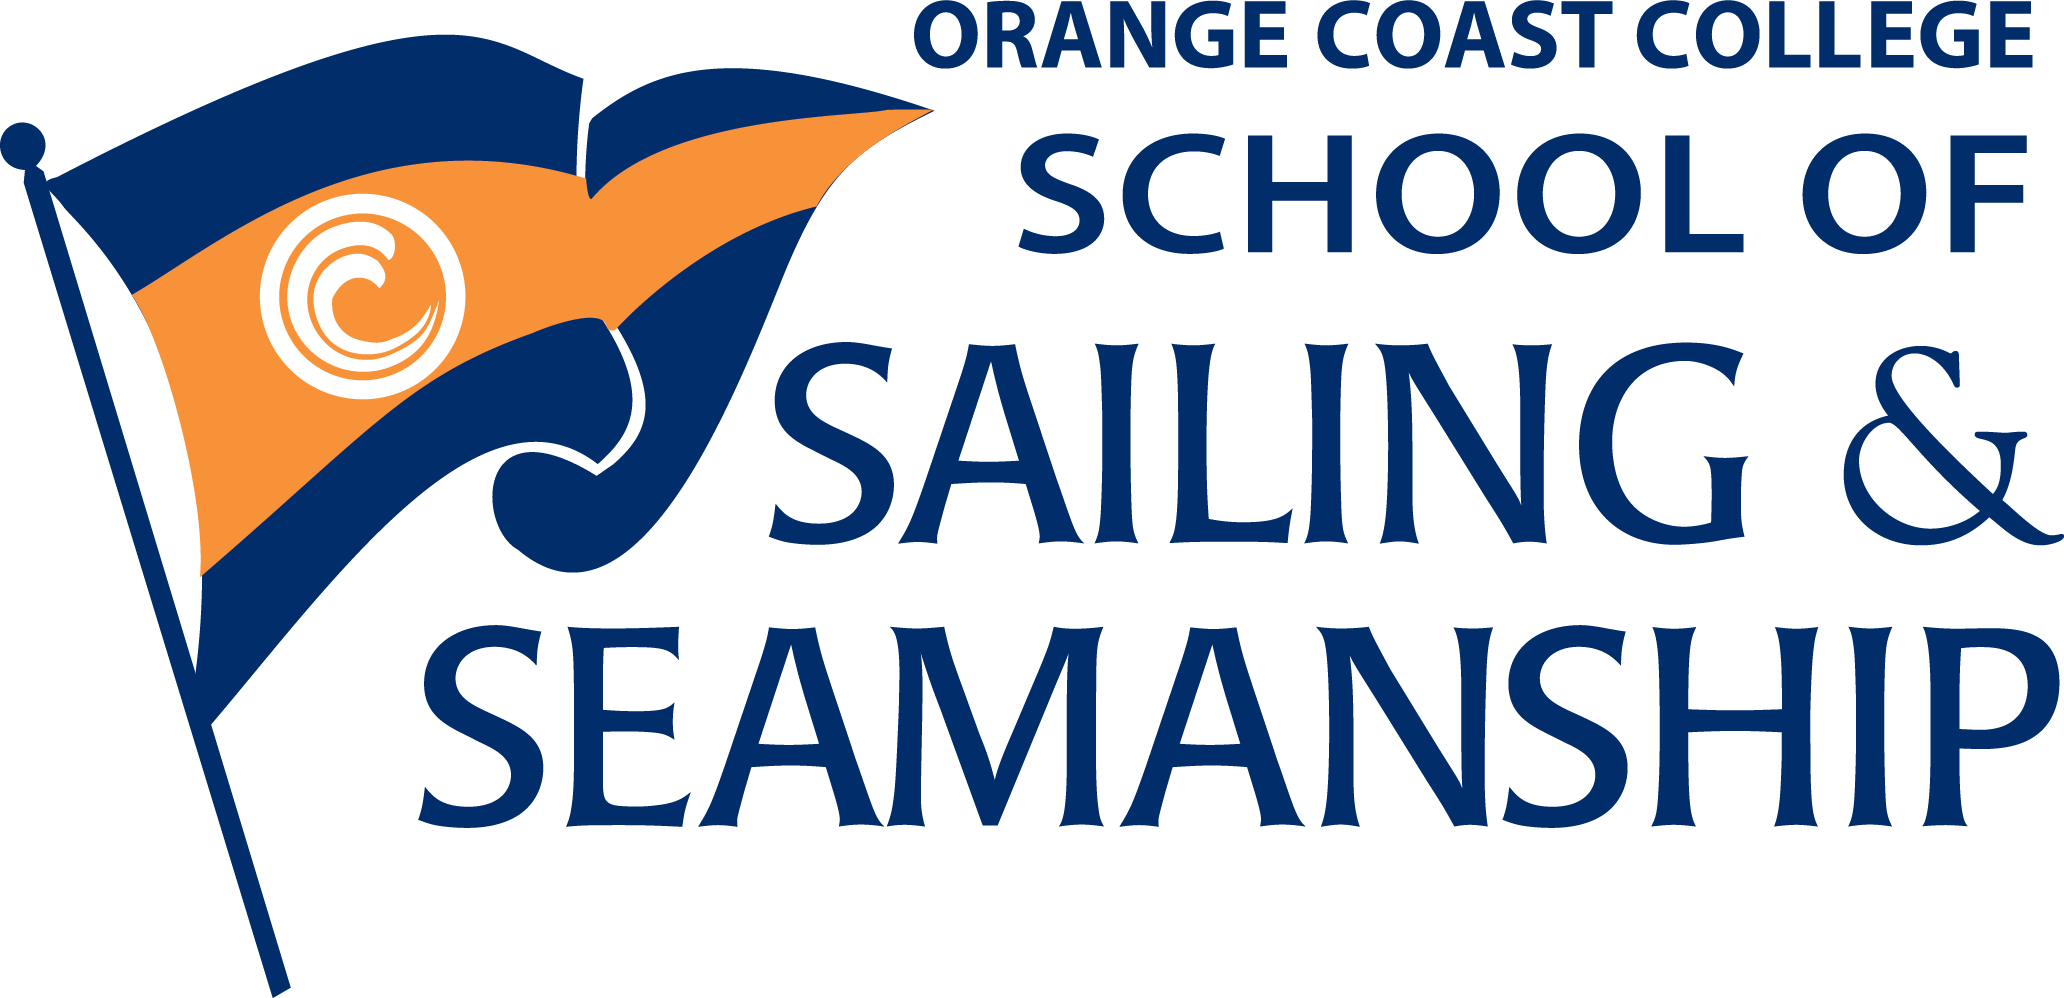 100 Ton Master Online Course (OCC School of Sailing and Seamanship)